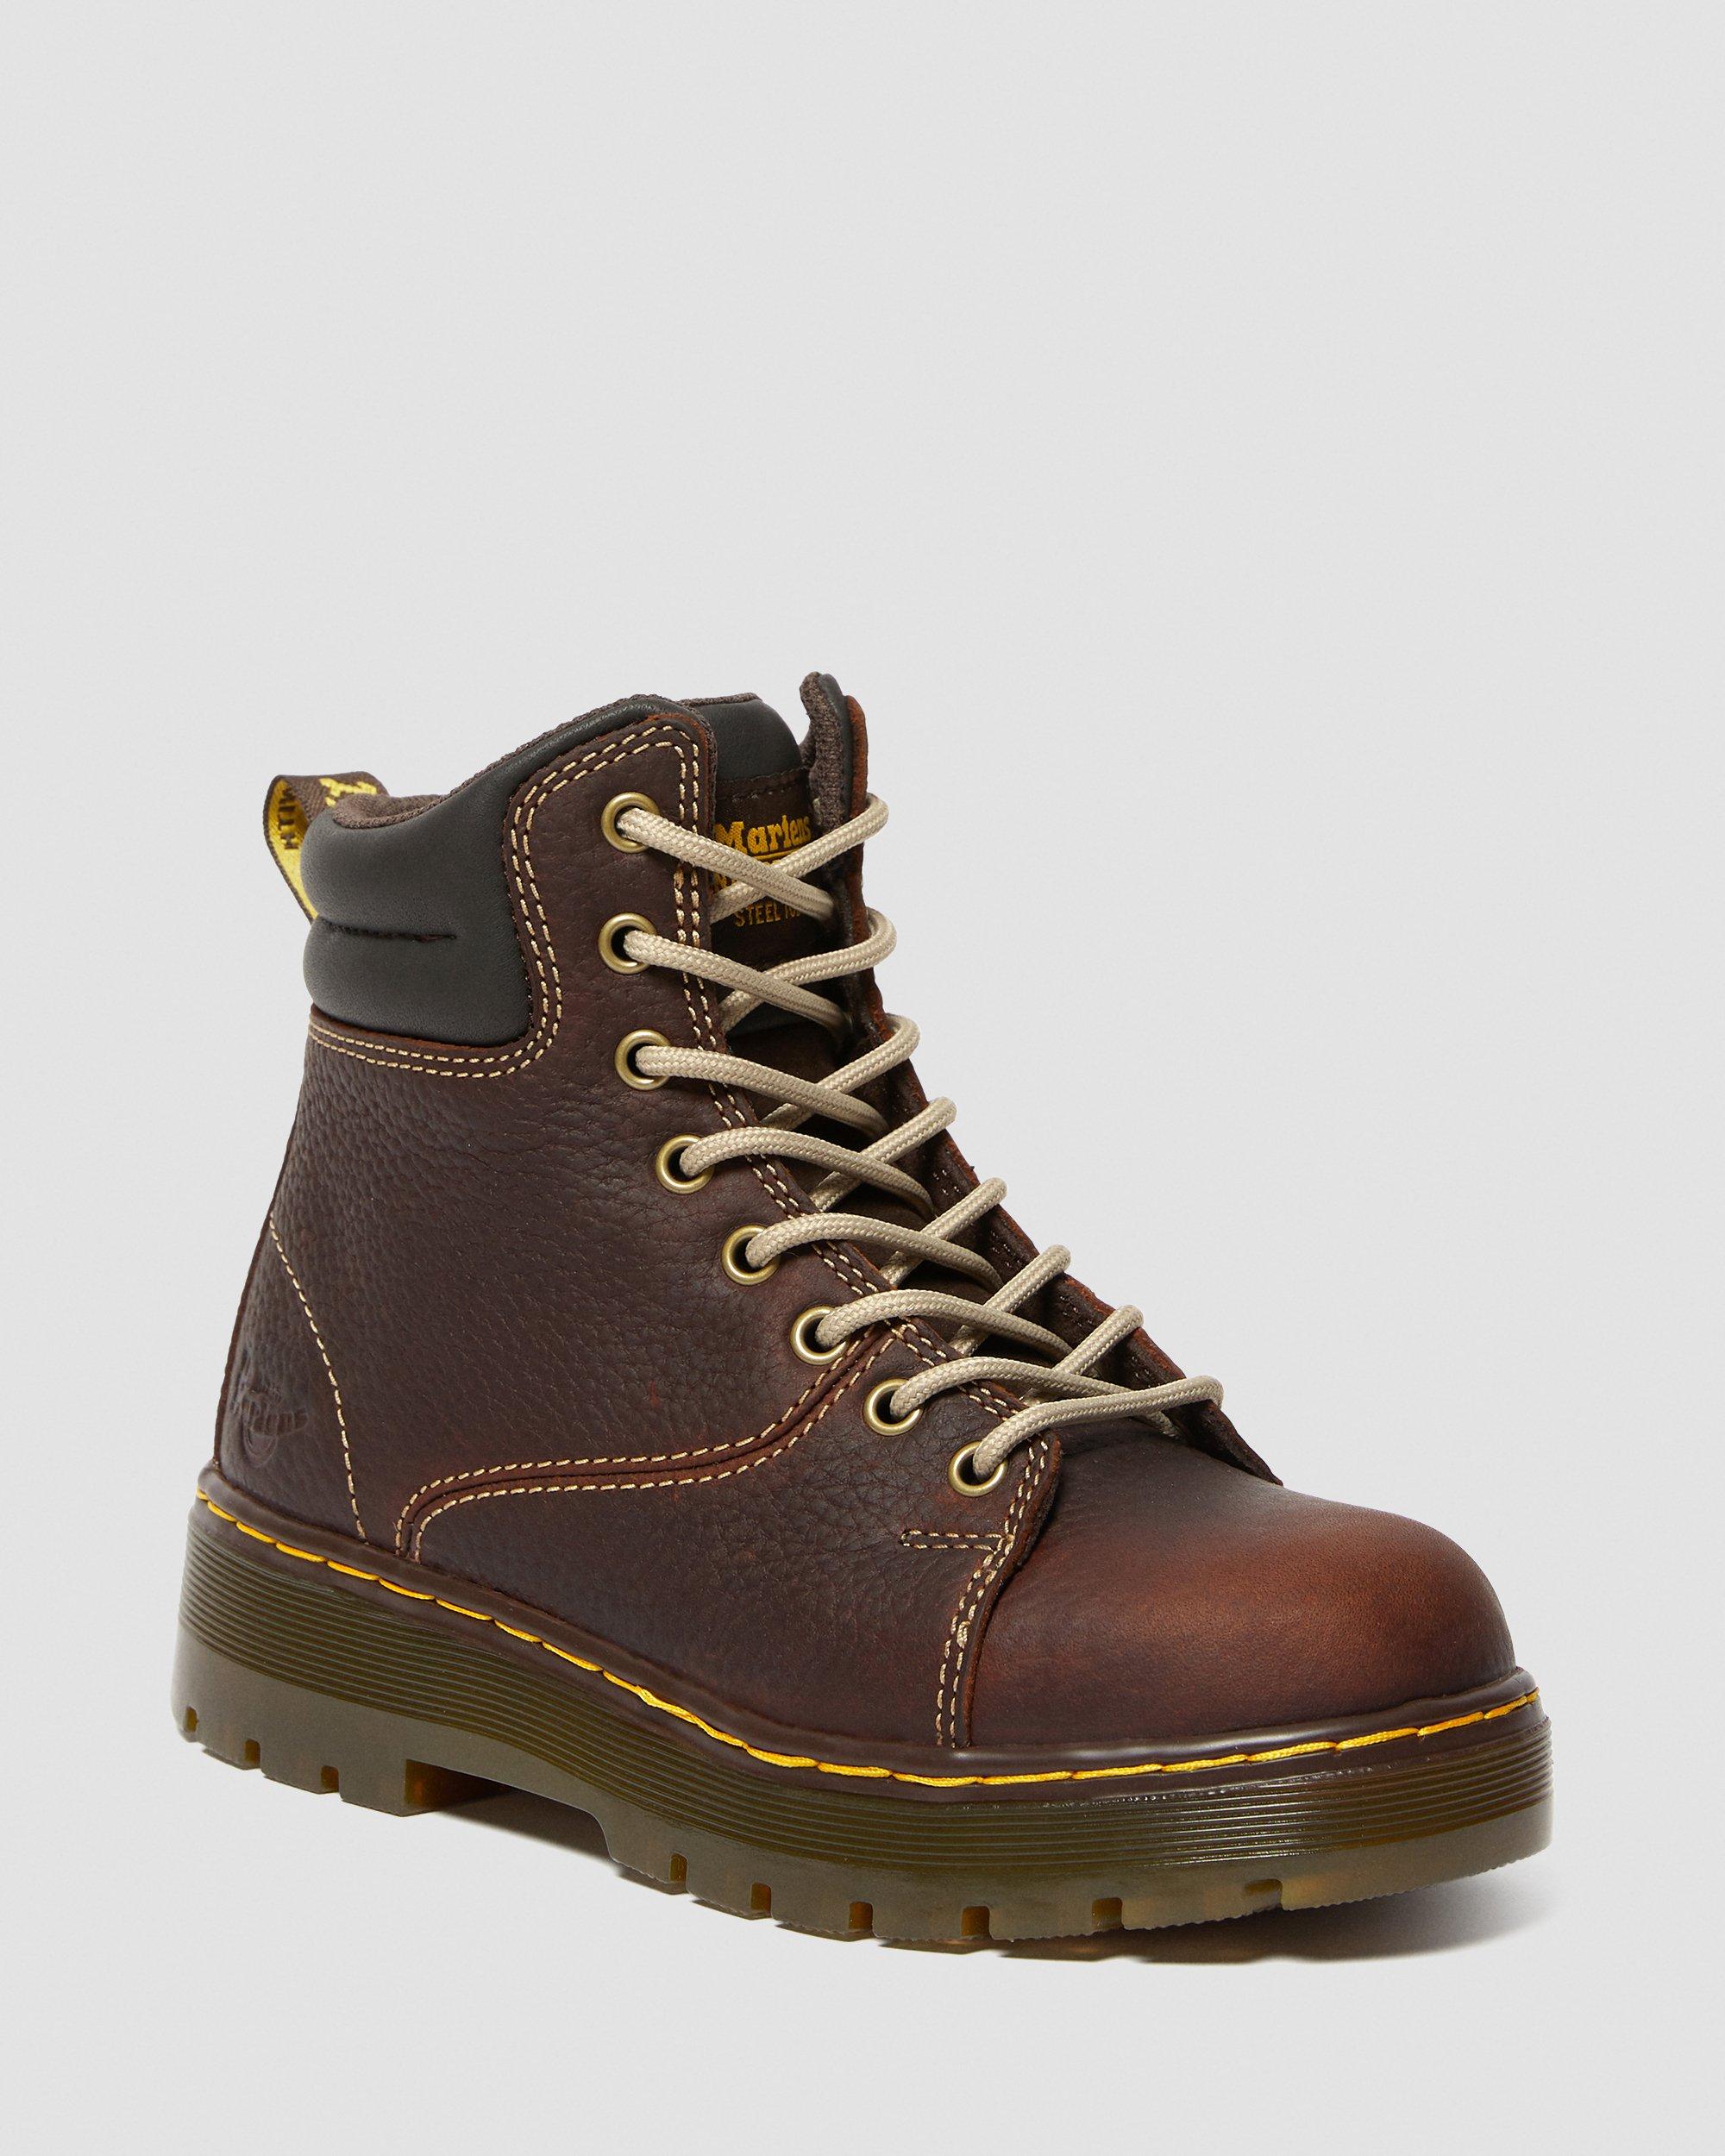 STEEL TOE LEATHER WORK BOOTS | Dr. Martens